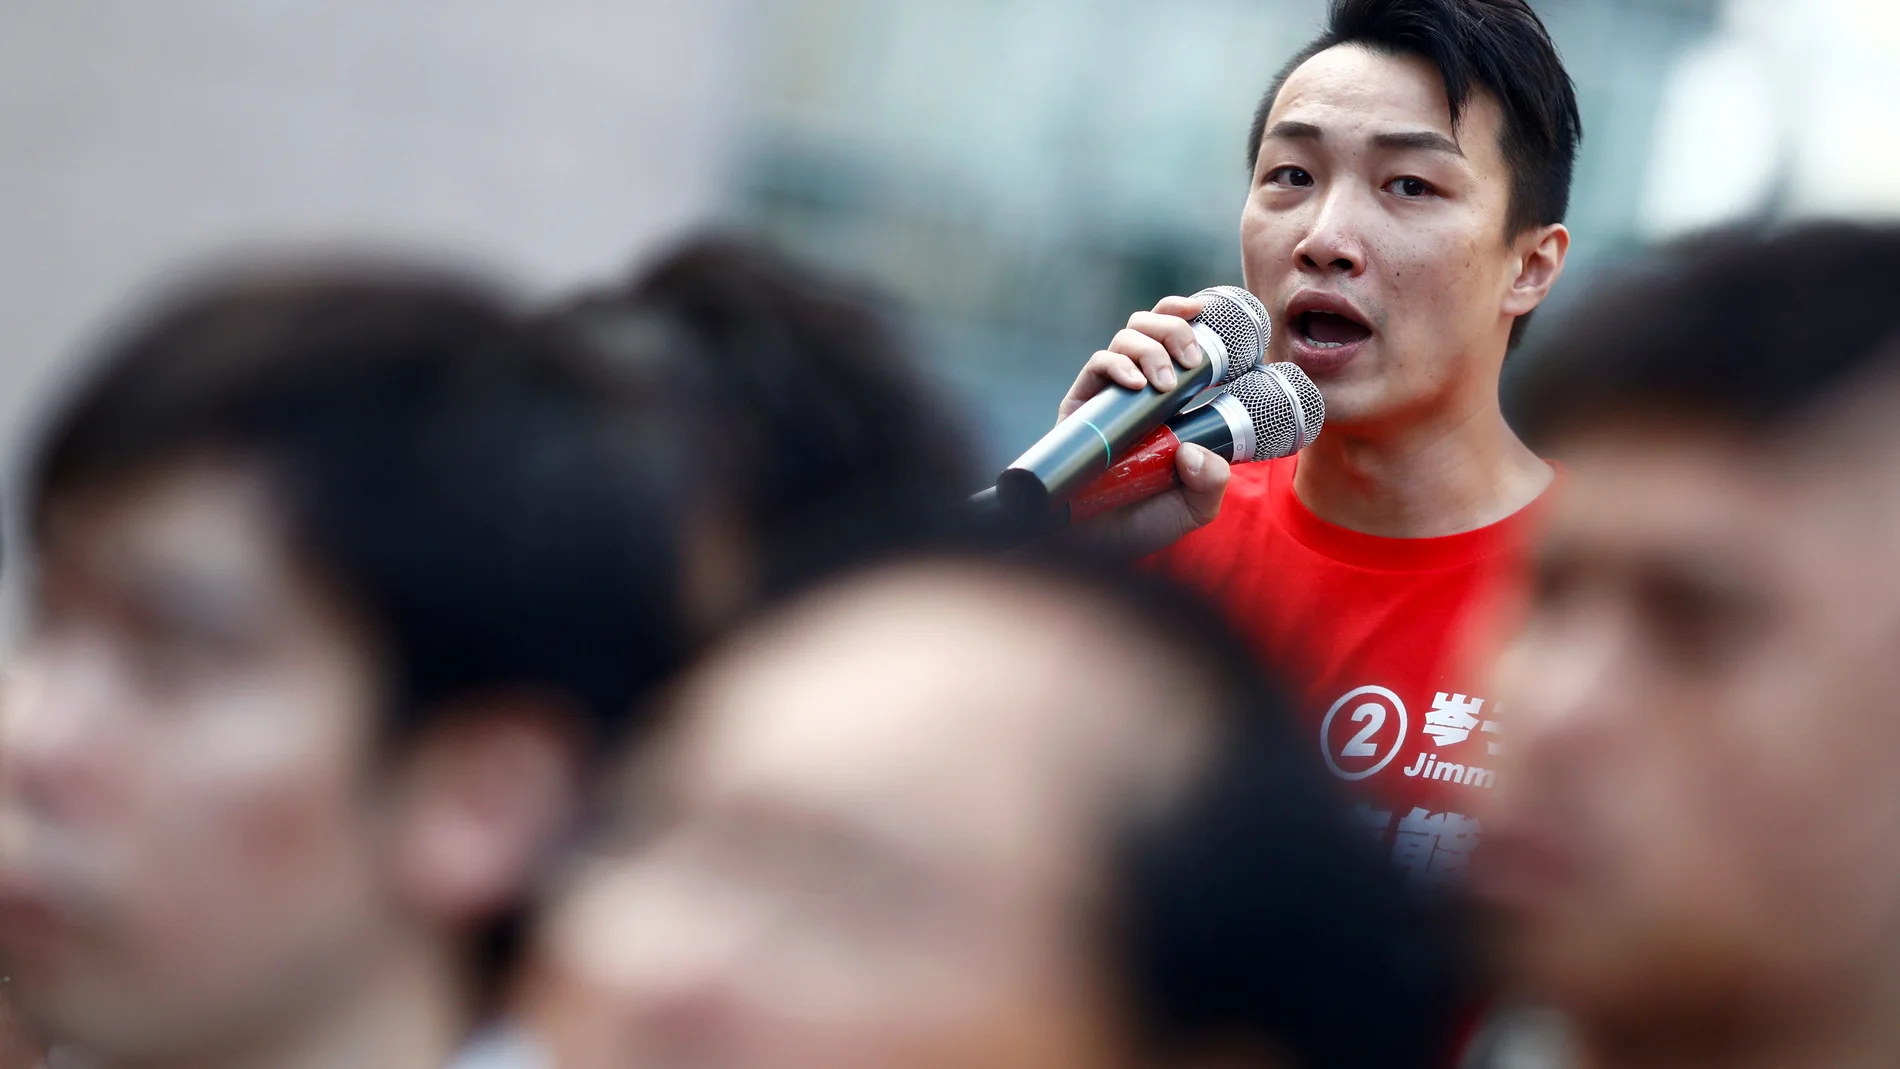 Pro-democratic district councilor-elect Jimmy Sham speaks to supporters at the campus of the Polytechnic University (PolyU) in Hong Kong